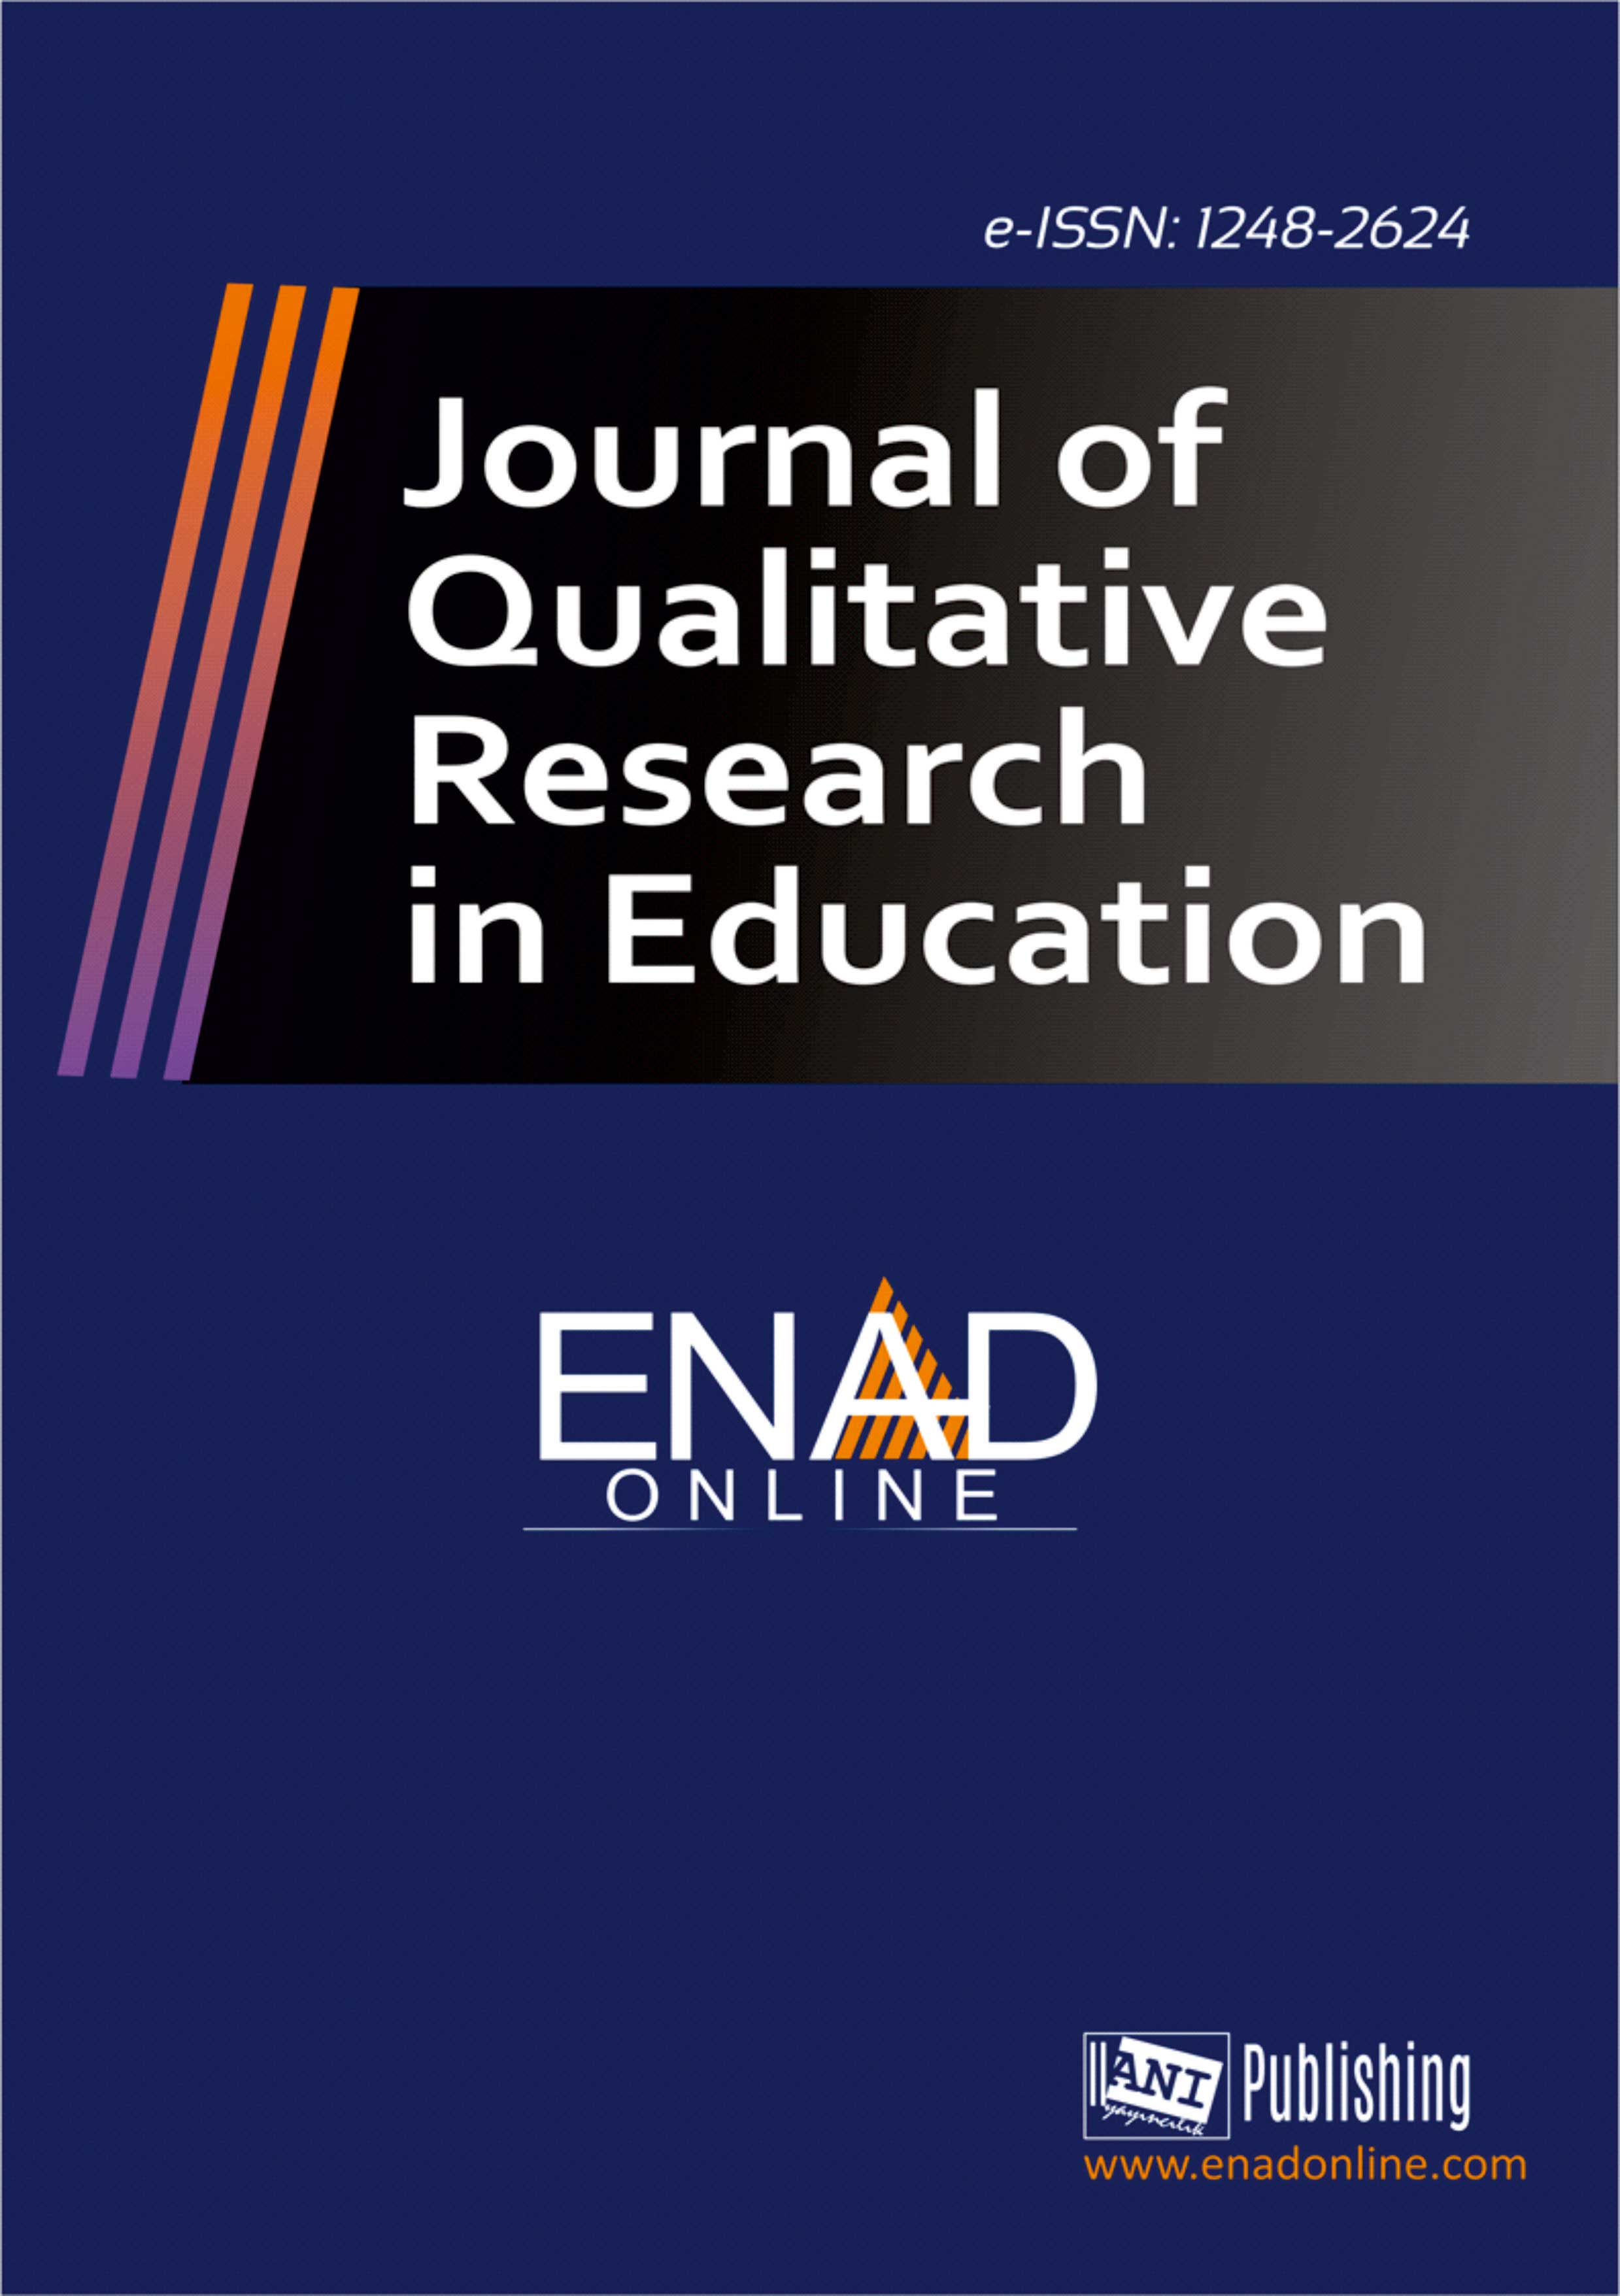 					View Issue 31 (2022): Journal of Qualitative Research in Education
				